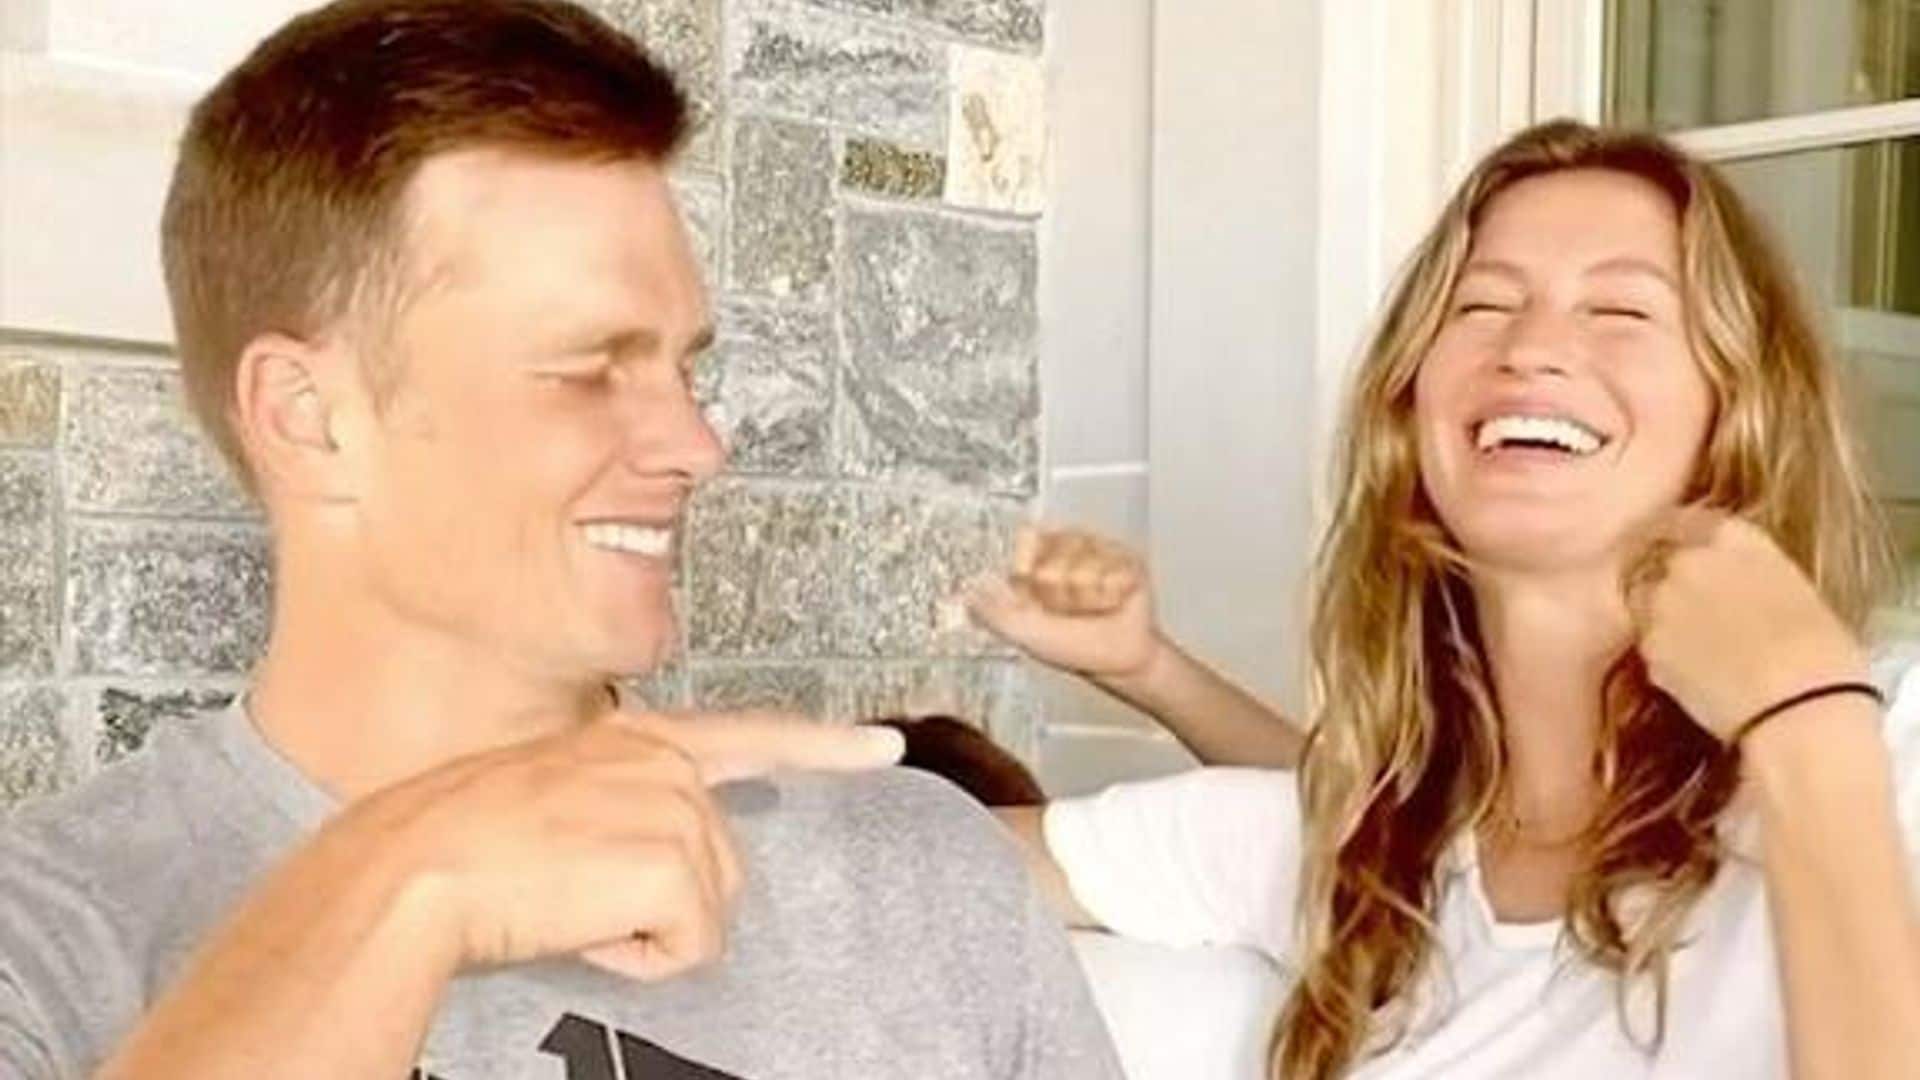 Gisele Bündchen and Tom Brady take couples challenge – with special guest